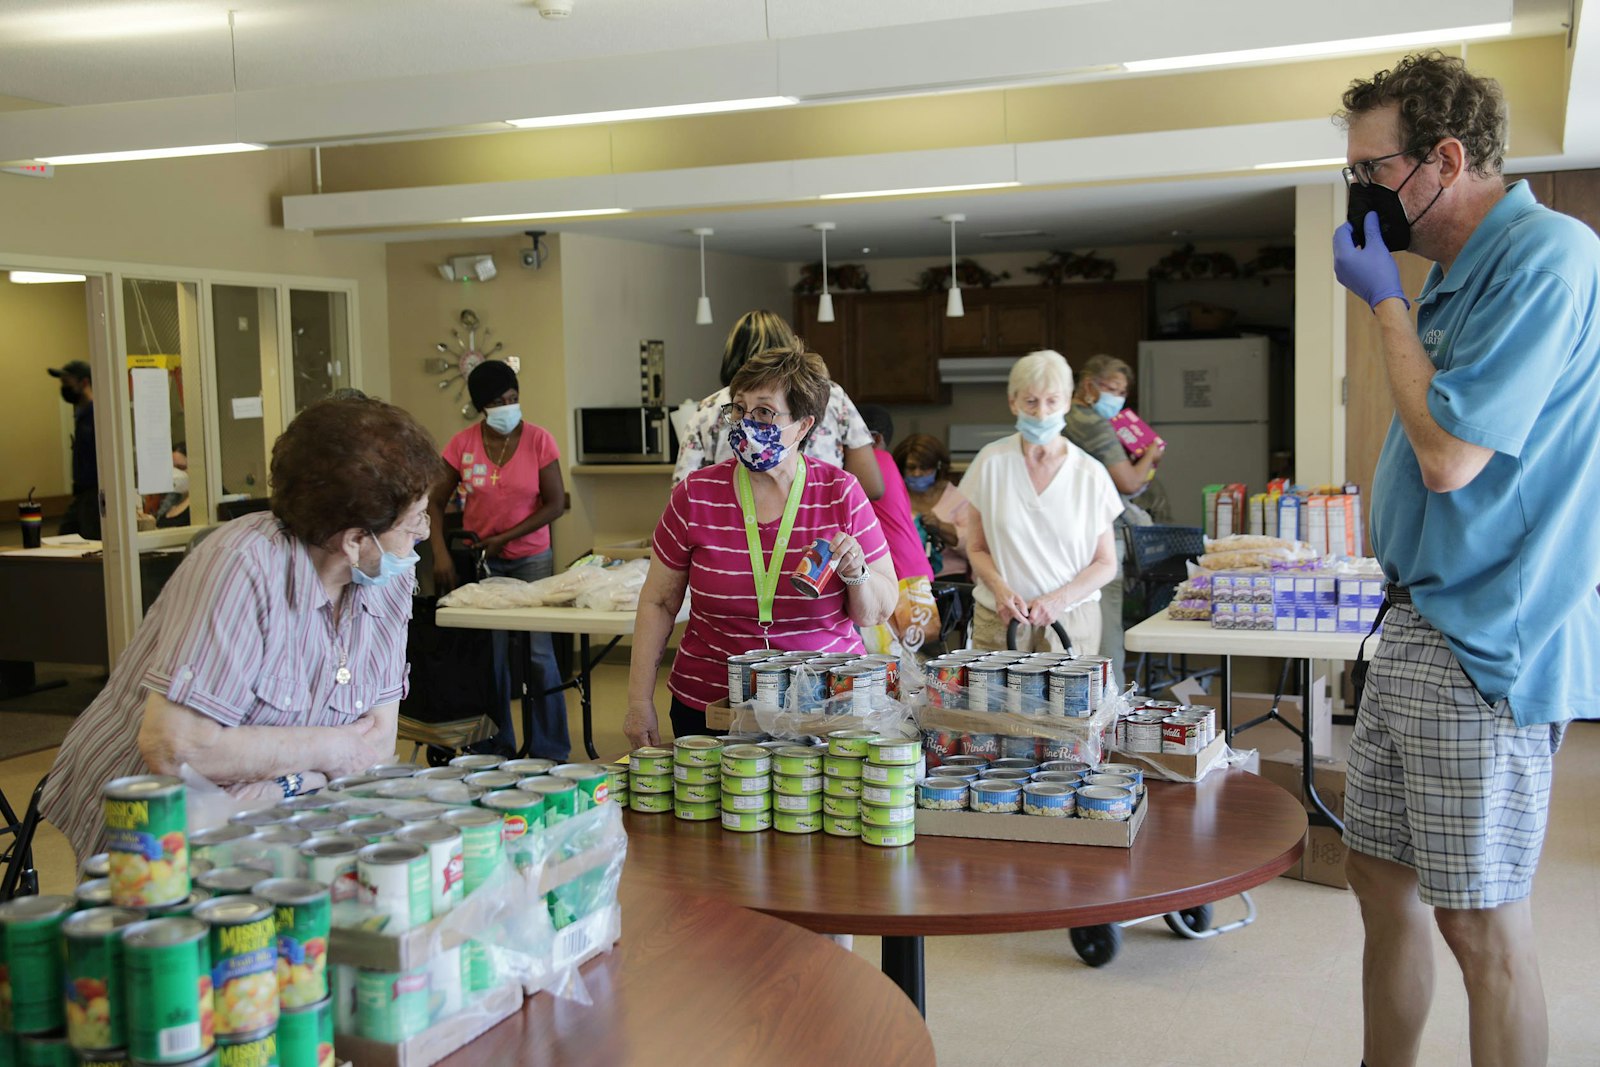 Mark Johnson, manager for program initiatives at Catholic Charities of Southeast Michigan, organizes volunteers in setting up a “pop-up pantry” at the Tivoli Manor Co-Apartments in Warren, where seniors can pick out food they need in a way that resembles a grocery store.